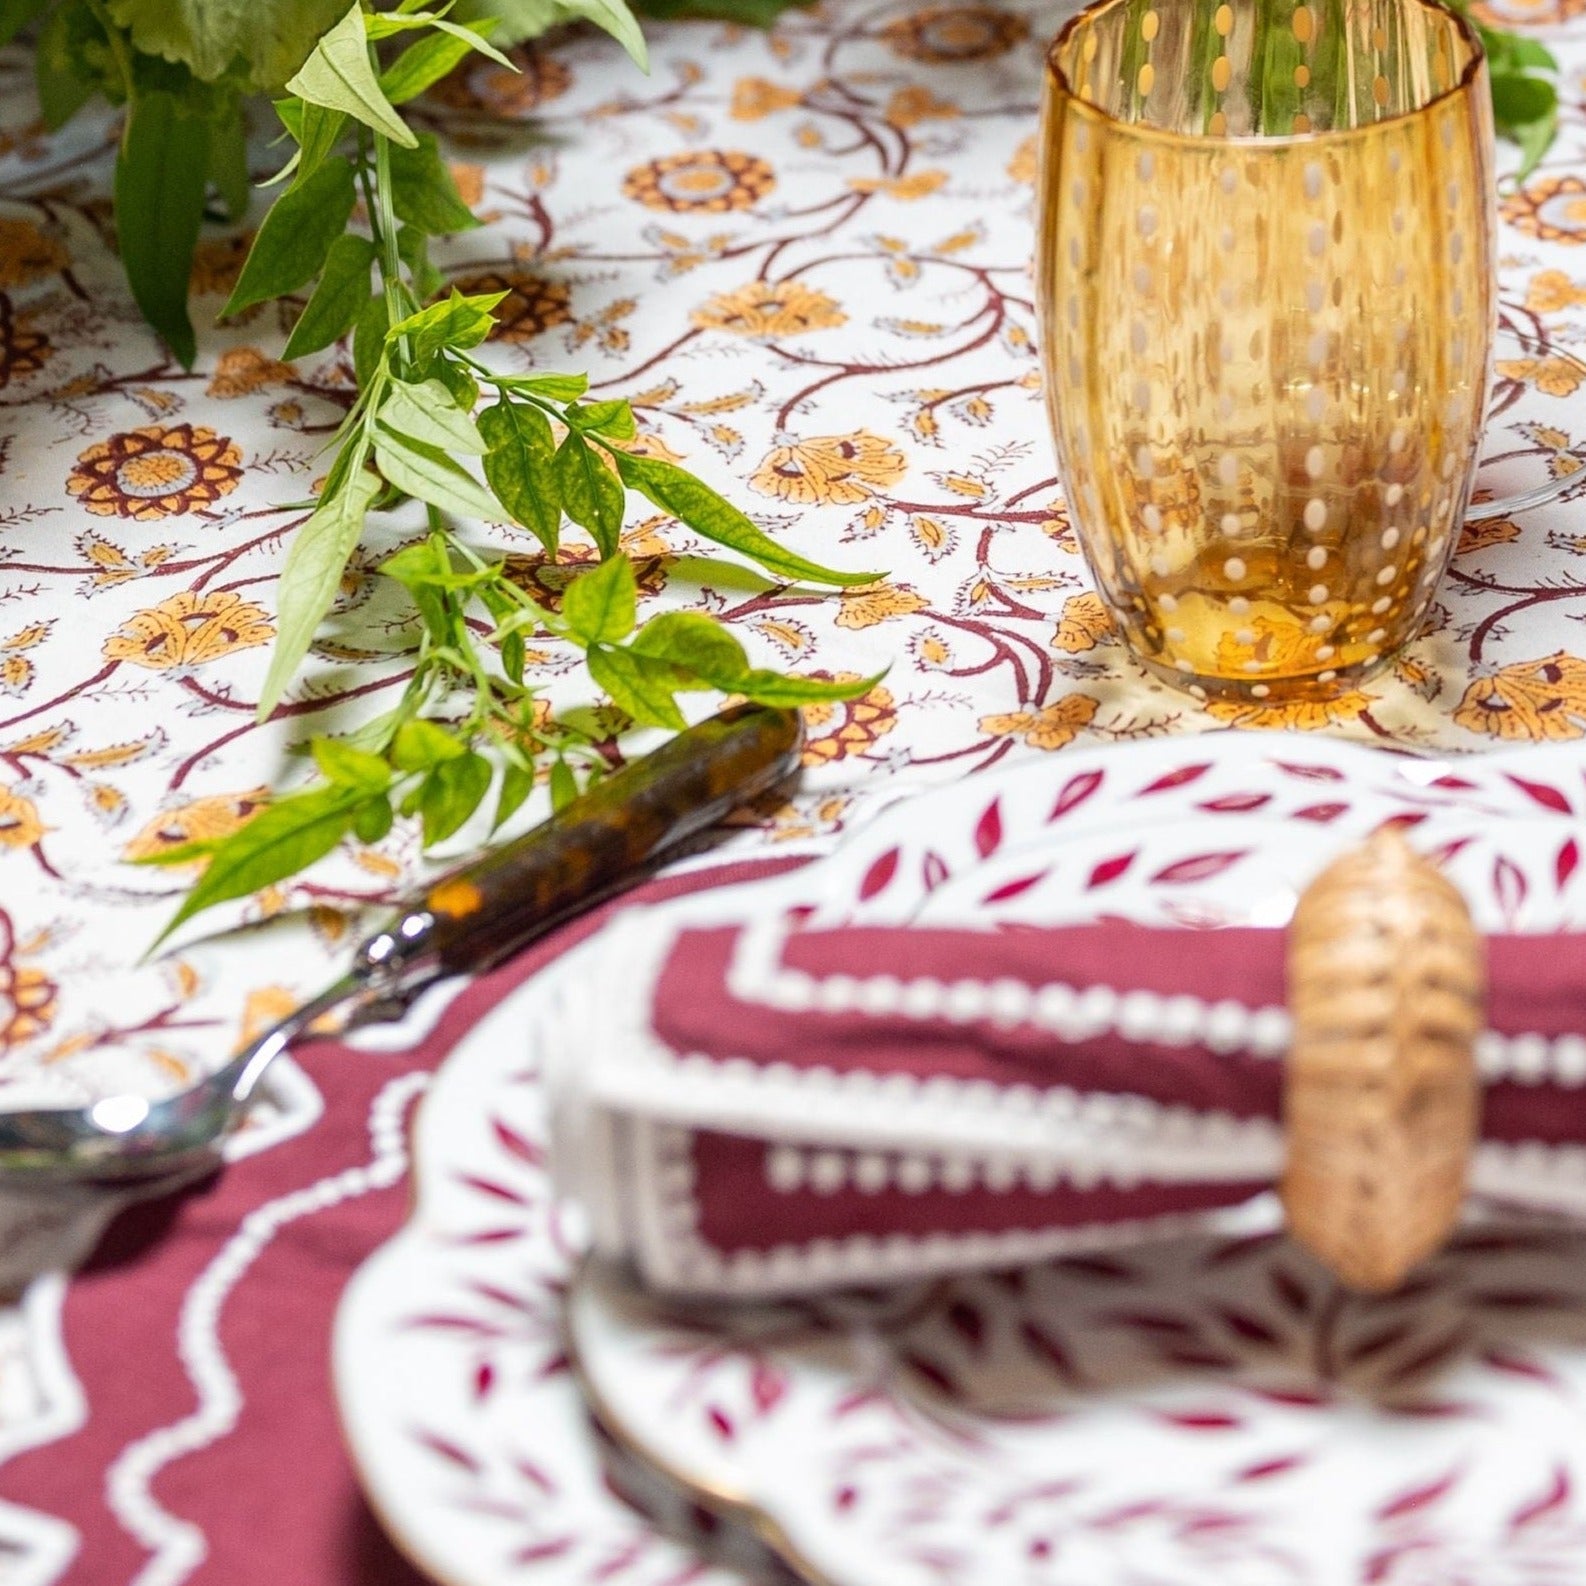 The Windsor Tablecloth